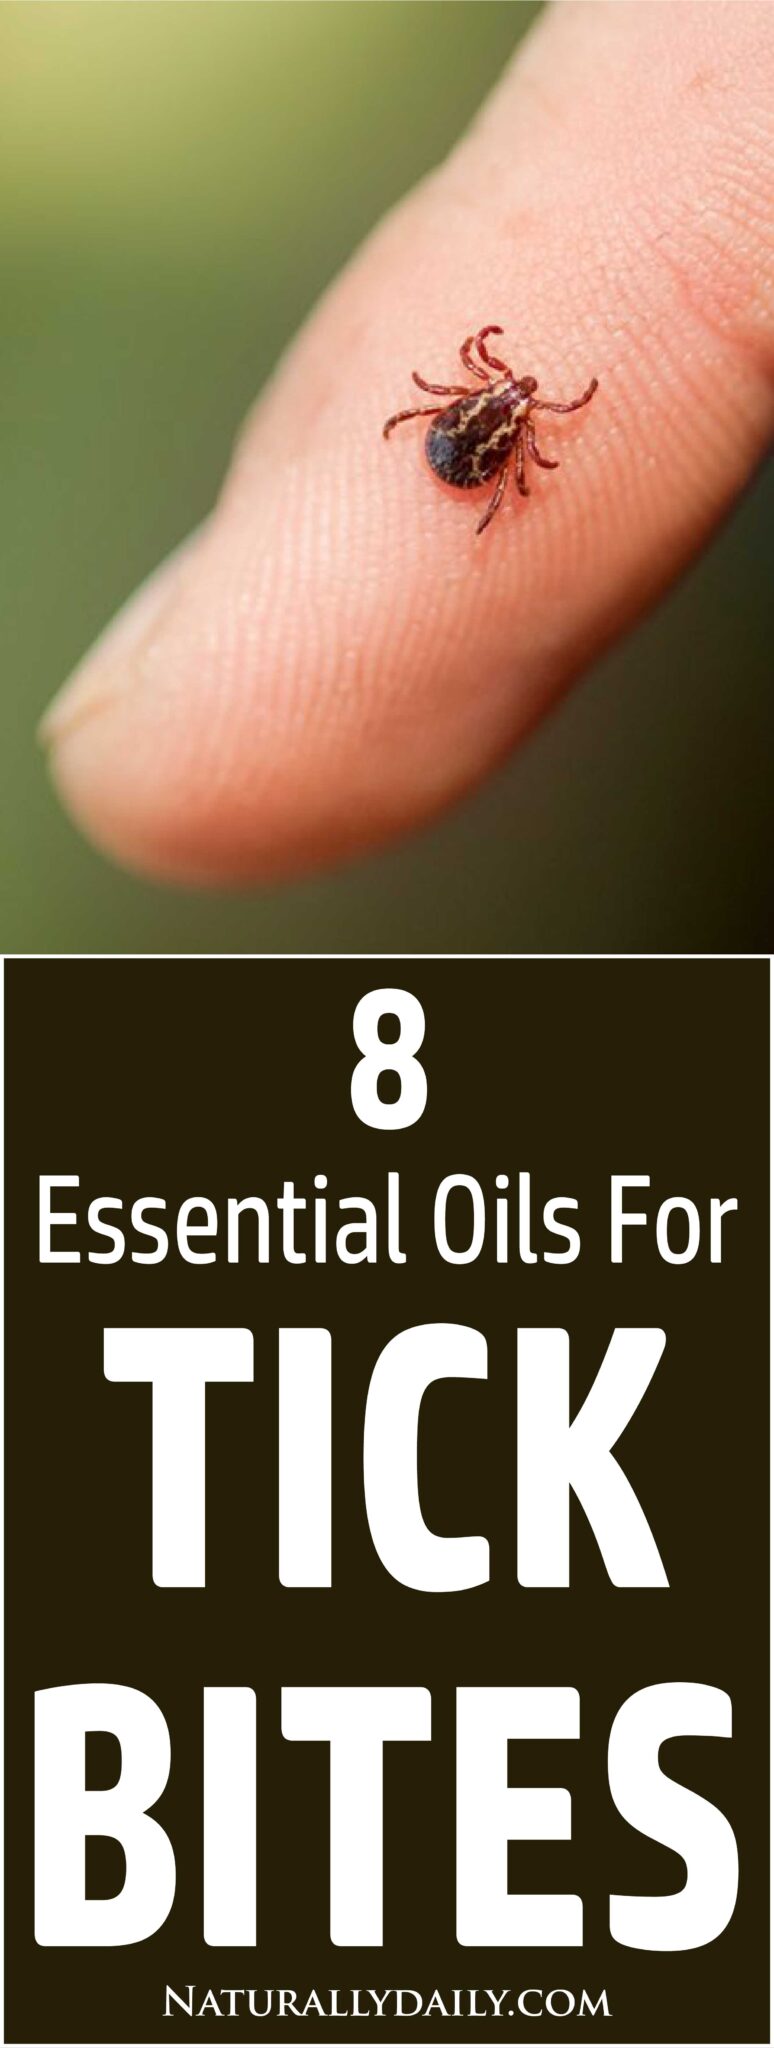 8 Best Essential Oils for Tick Bites Home Remedy - Naturally Daily